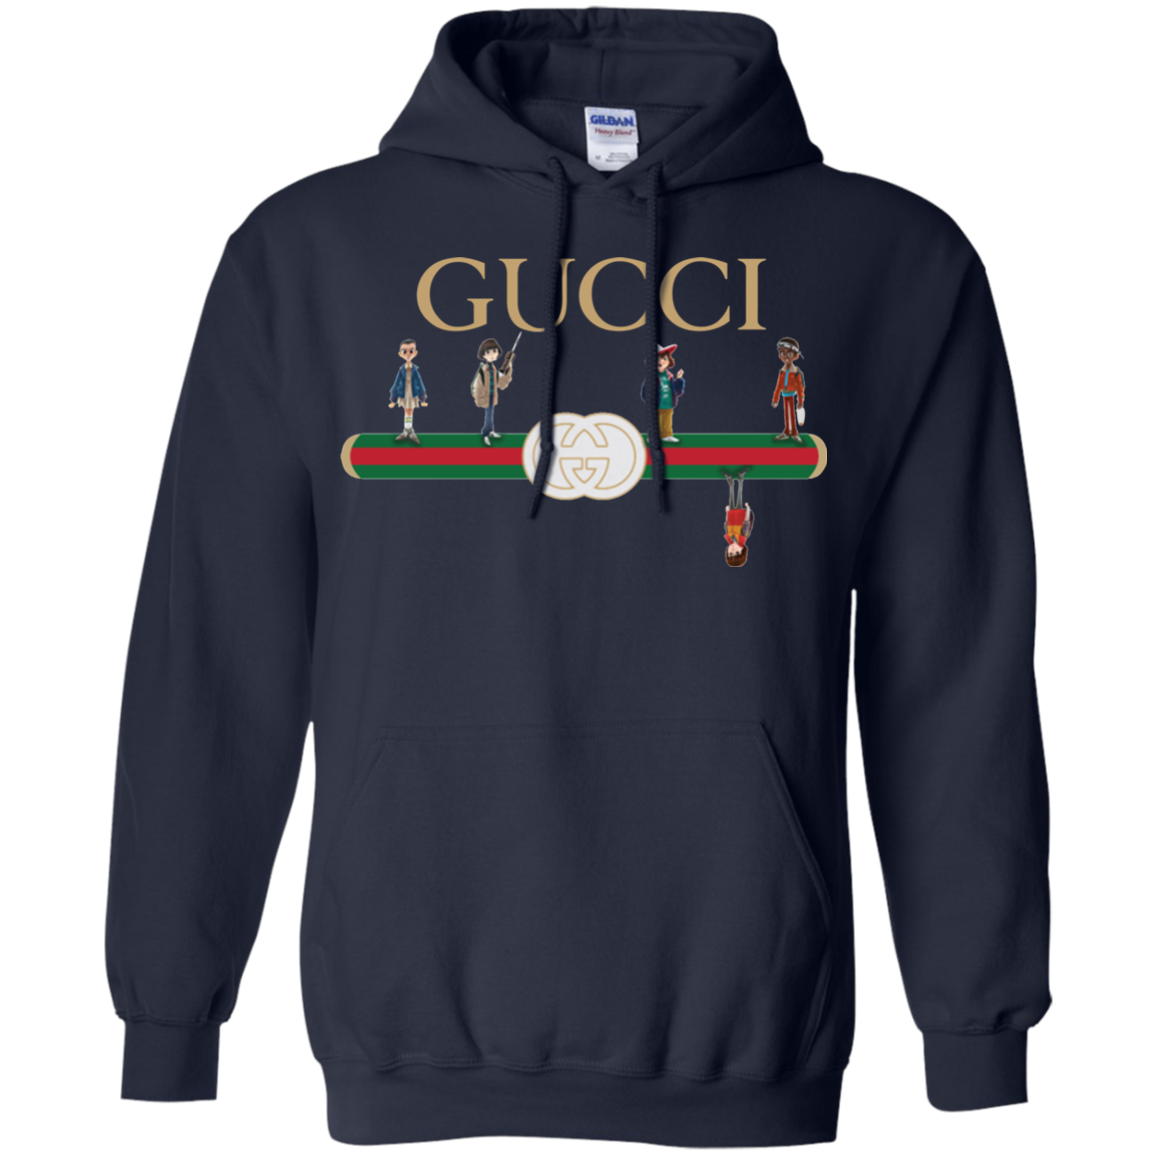 GUCCI – Stranger Things UPSIDE DOWN 